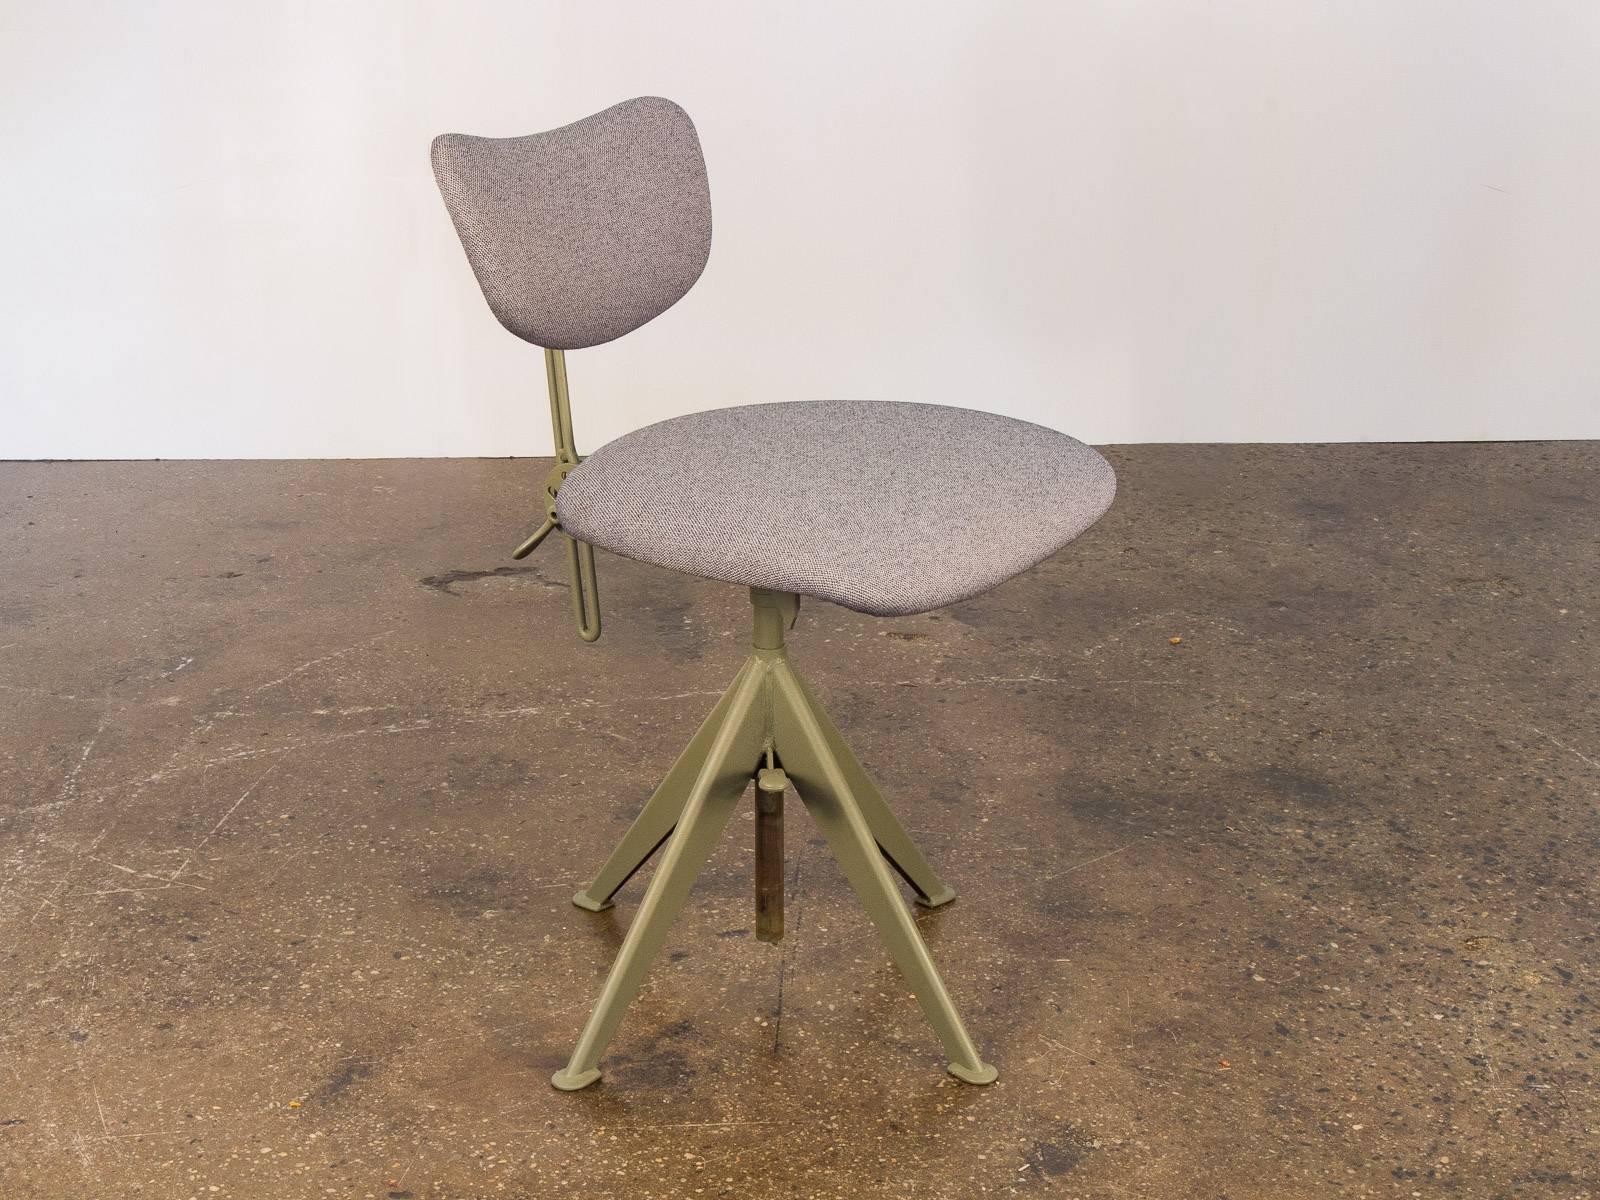 This Odelberg Olsen work chair from the late 1940s has been lovingly restored and then some the adjustable articulations allow the seat position to be raised and lowered. The backrest also can be moved for ultimate comfort. Freshened up, the seat